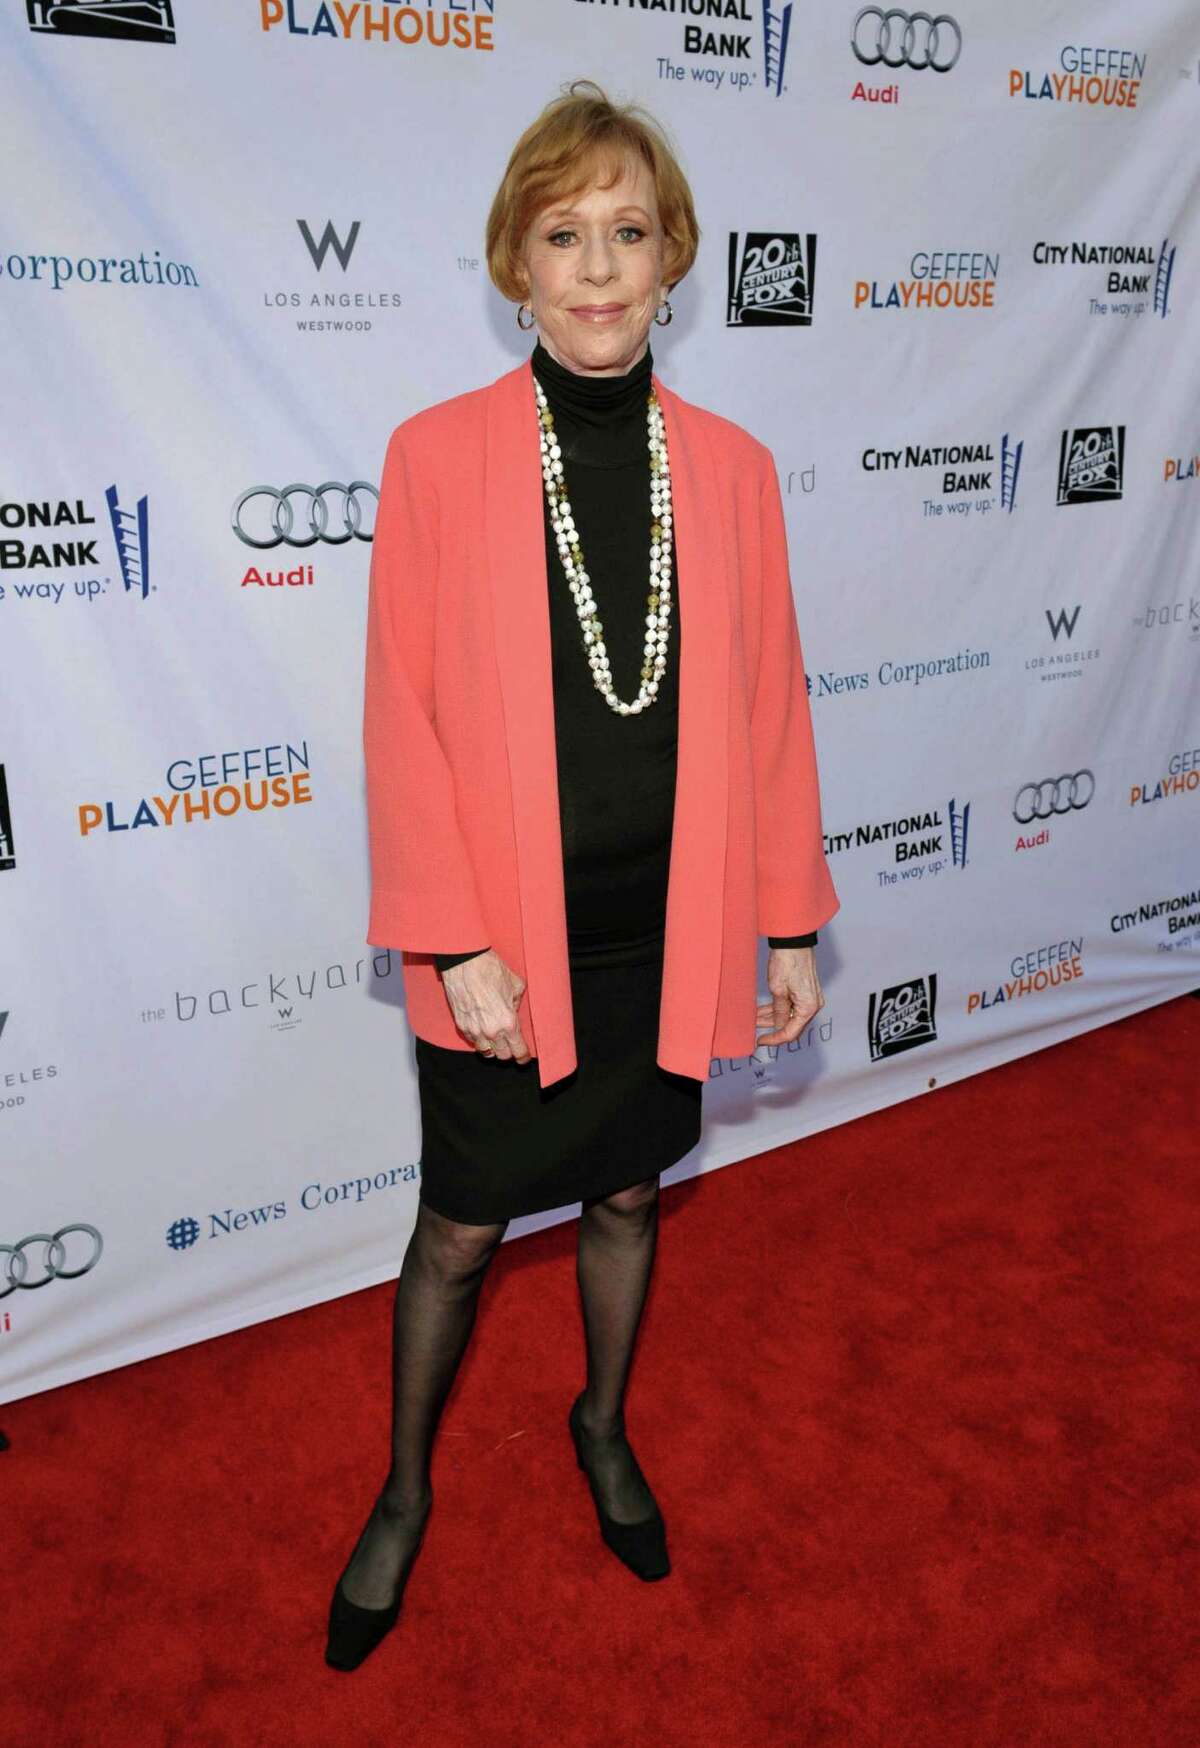 FILE - In this June 4, 2012 publicity image provided by Geffen Playhouse, Carol Burnett arrives at the "Backstage At The Geffen" Fundraiser at the Geffen Playhouse, in Los Angeles. On Jan. 10, 2013, Burnett will be honored with the "Carol Burnett Honor of Distinction Award," presented by The Hollywood High School Performing Arts Center at the El Capitan Theatre in Hollywood, Calif. (AP Photo/Geffen Playhouse, John Shearer, File)